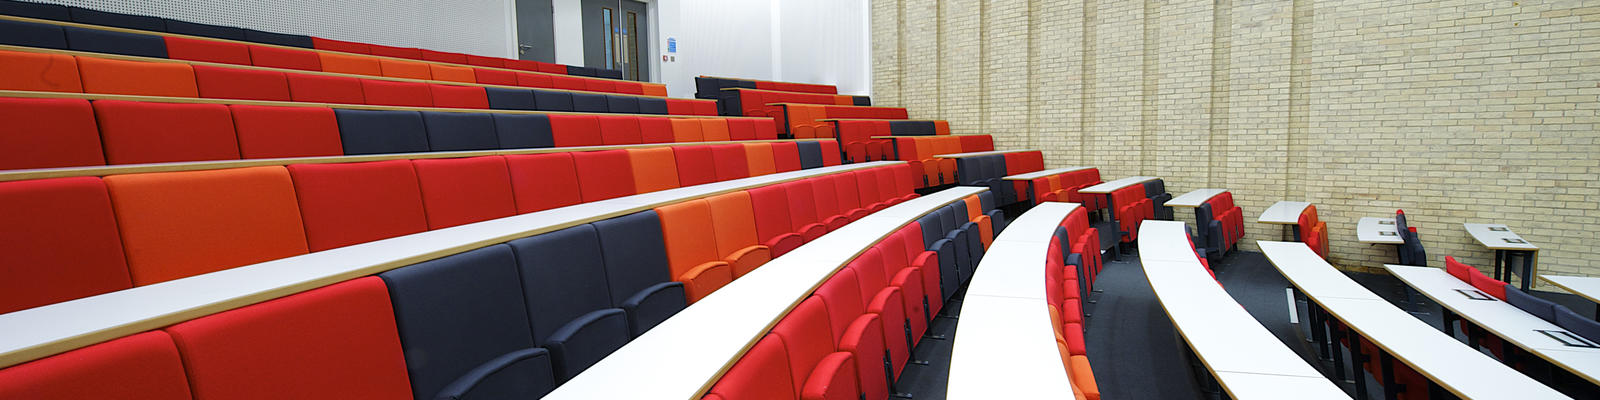 Lecture theater seats on Lancaster University campus